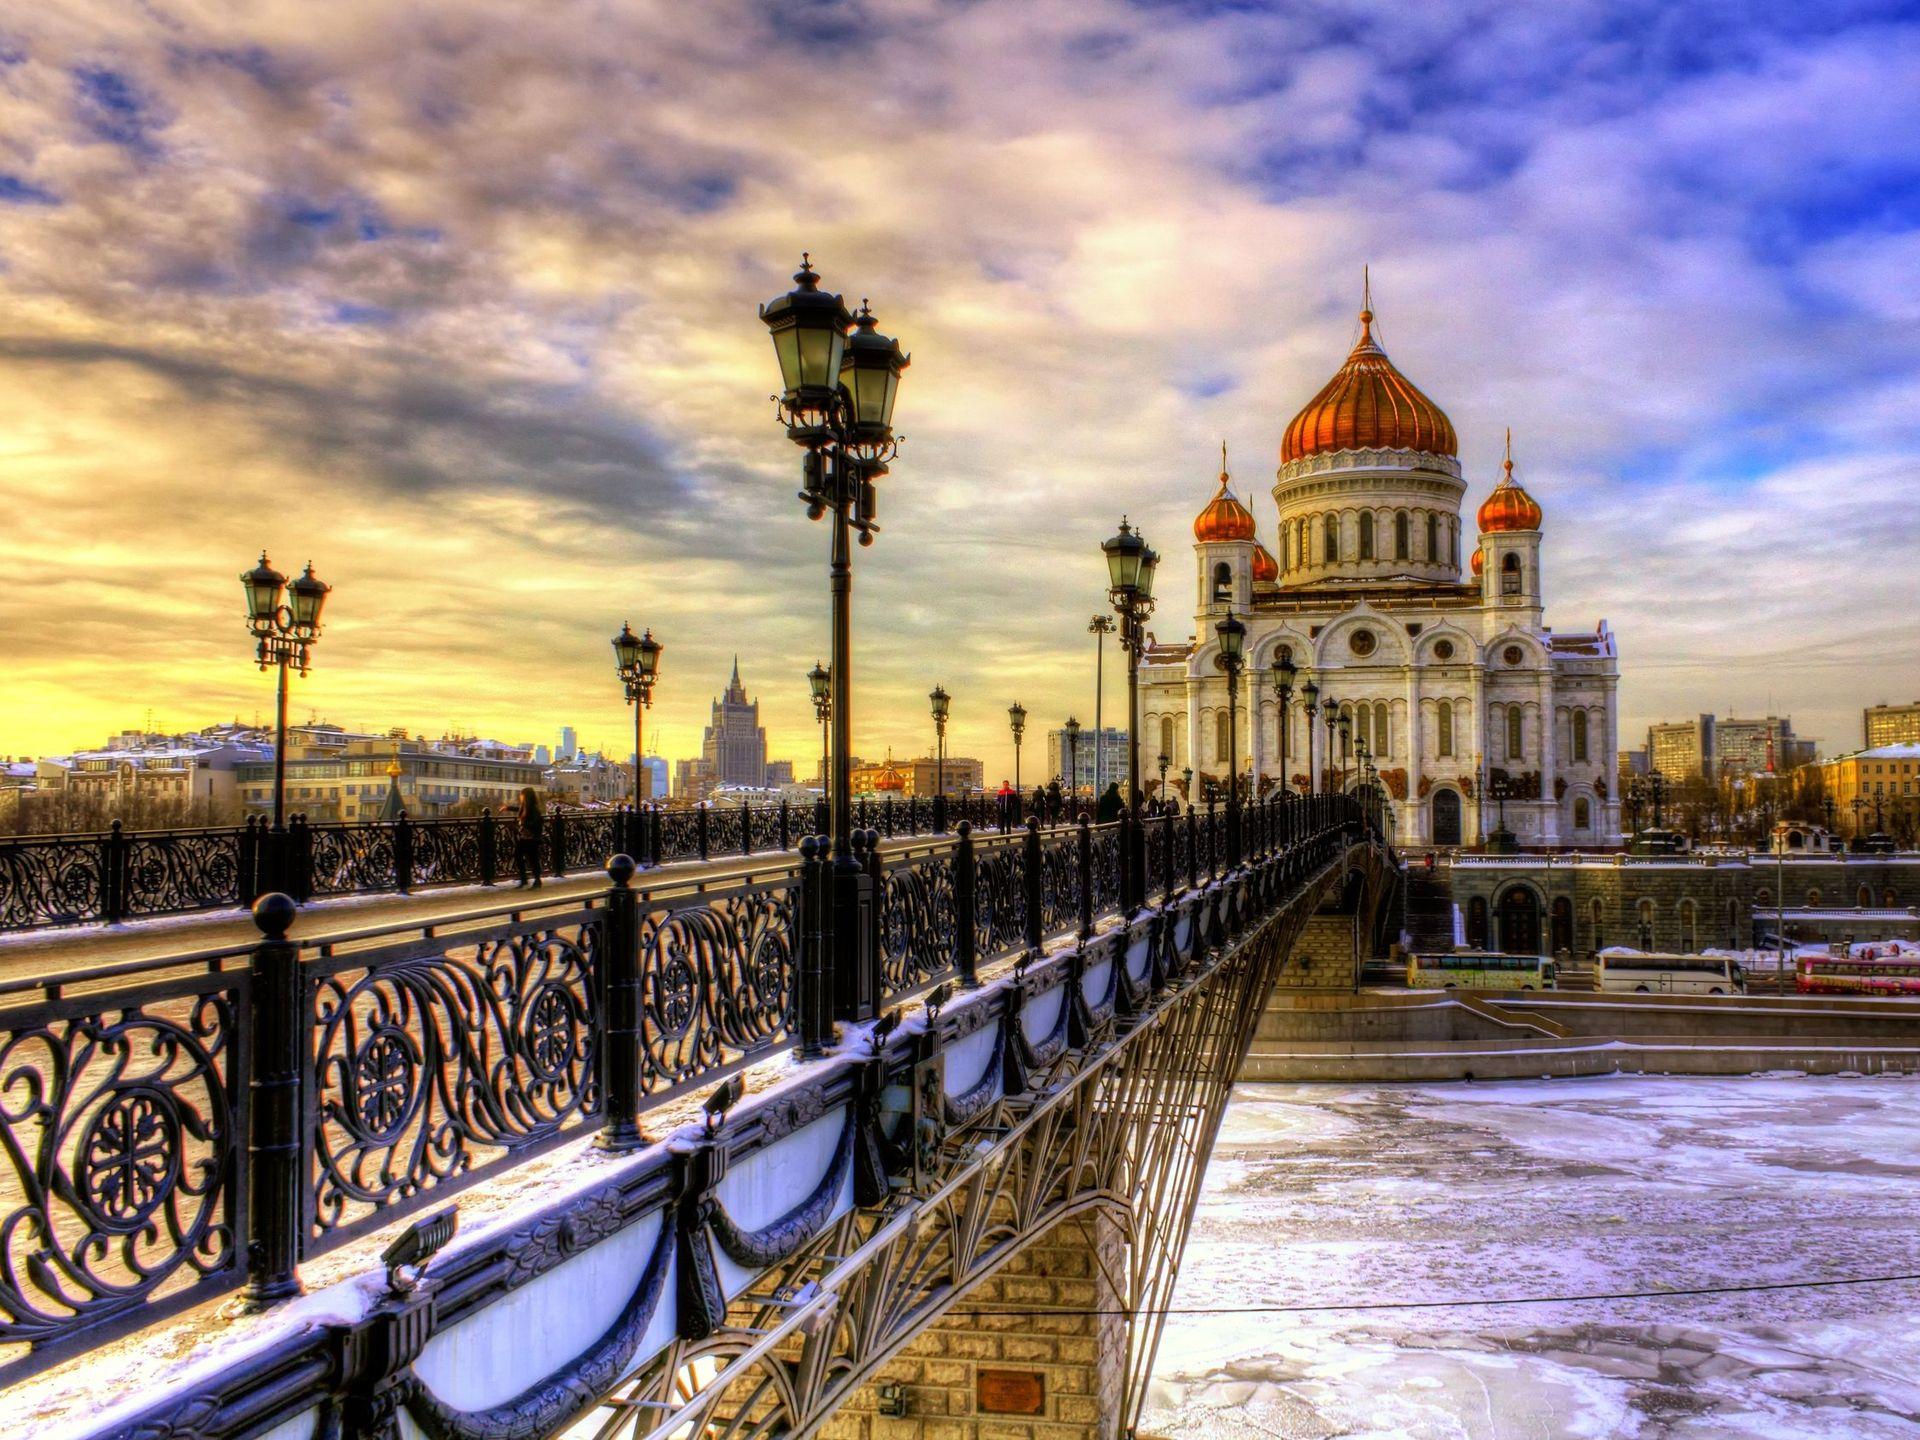 Elegant Russia Wallpaper Free Download: The Heritage of History